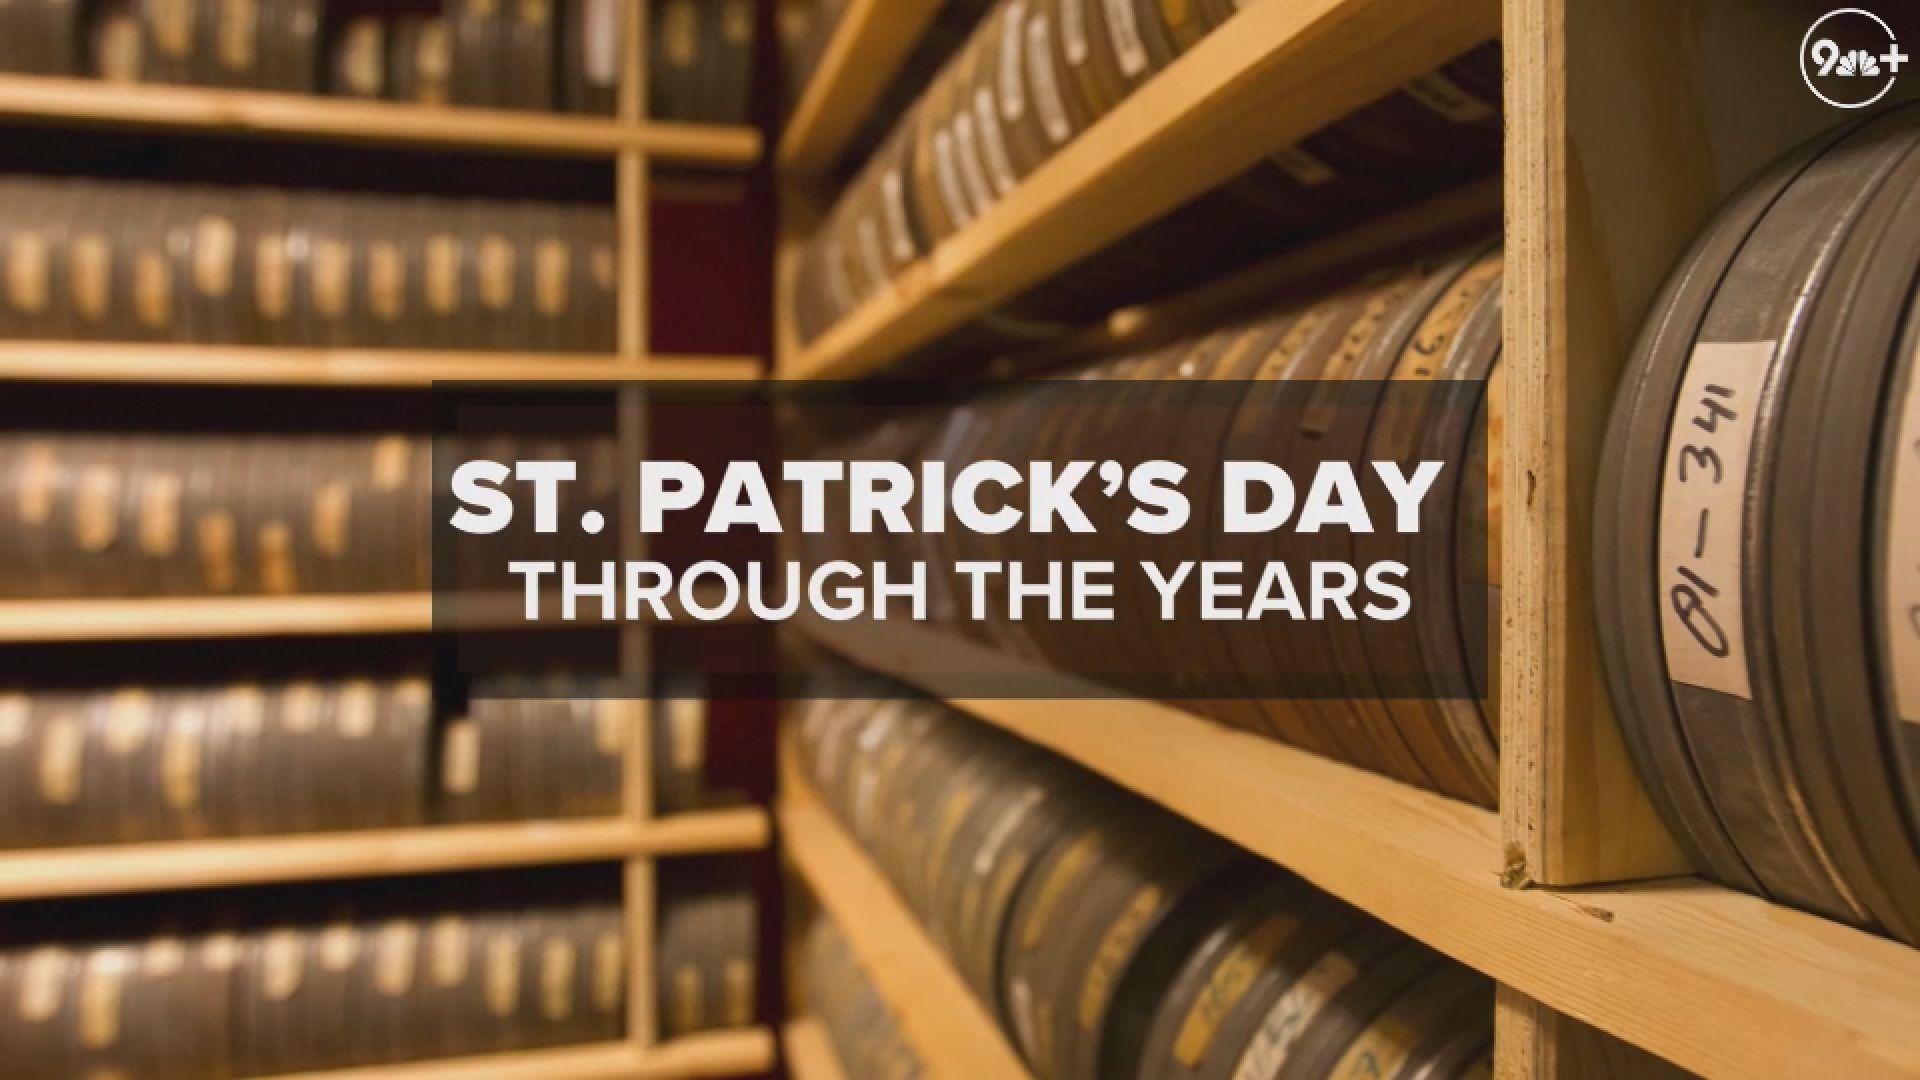 We went back through the 9NEWS archives to bring you some St. Patrick’s Day stories from past years.